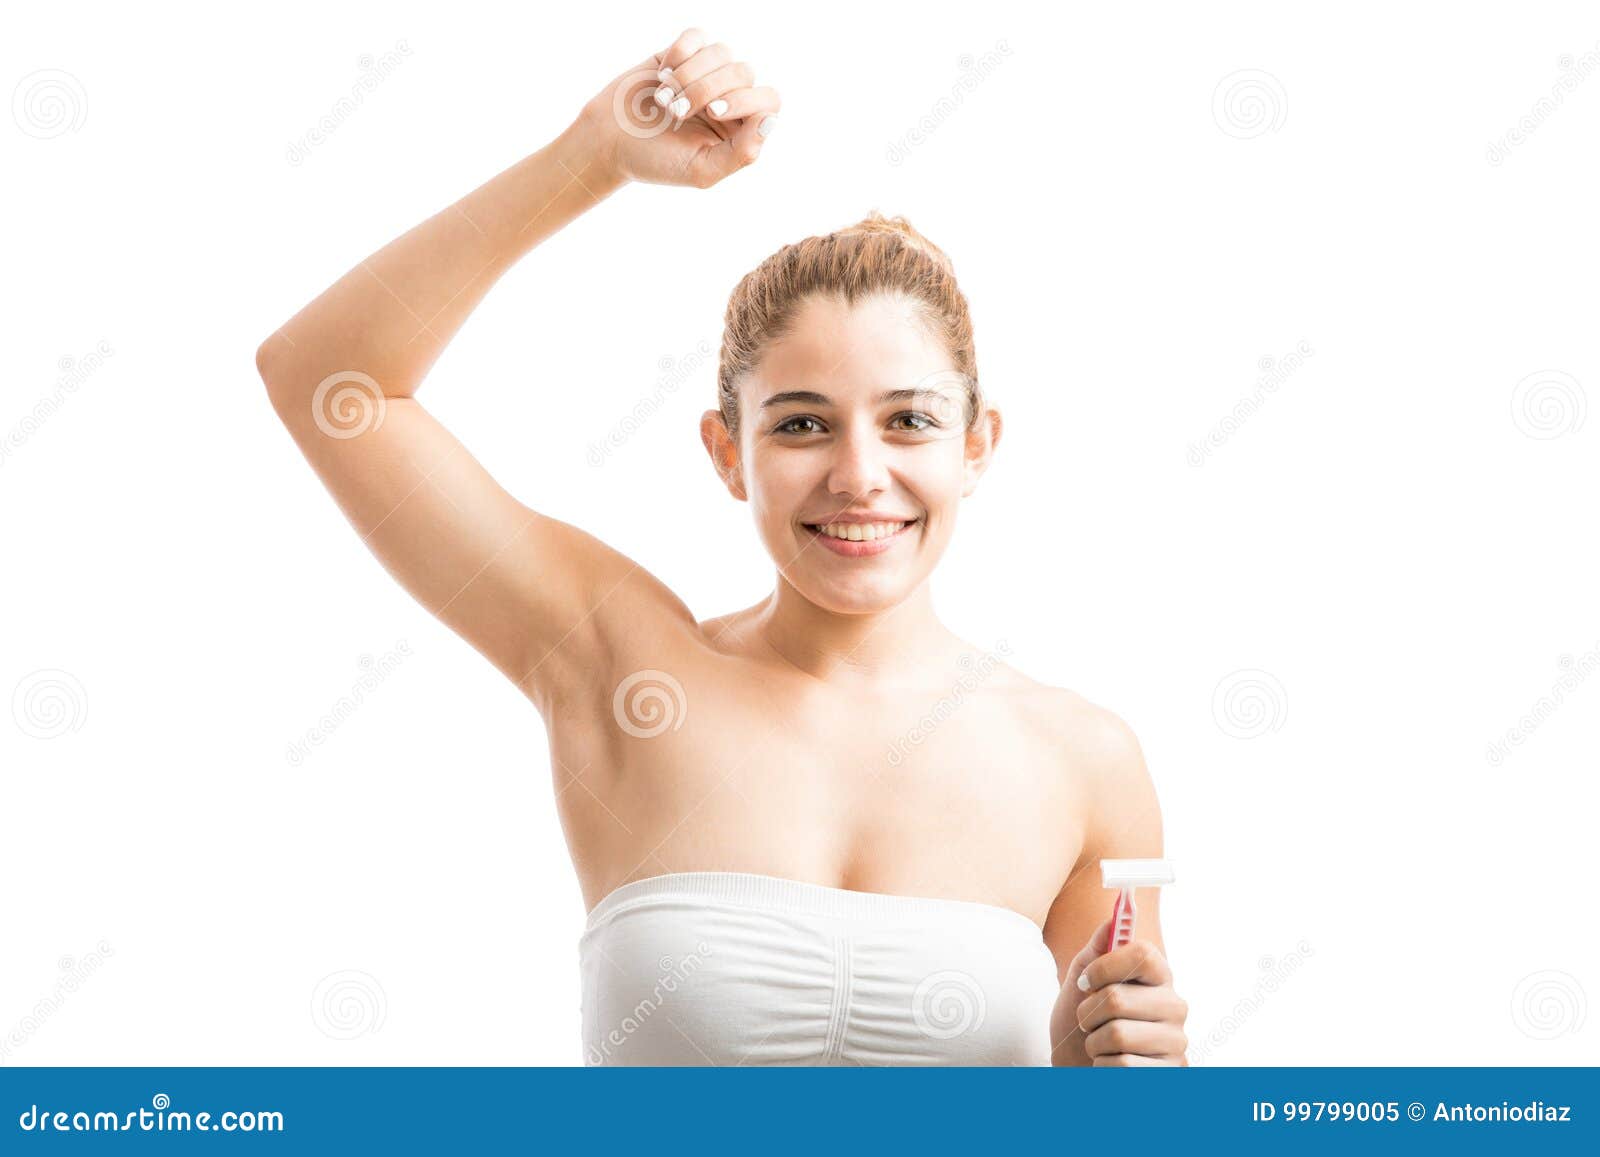 Should armpits her shaving when a start girl When should